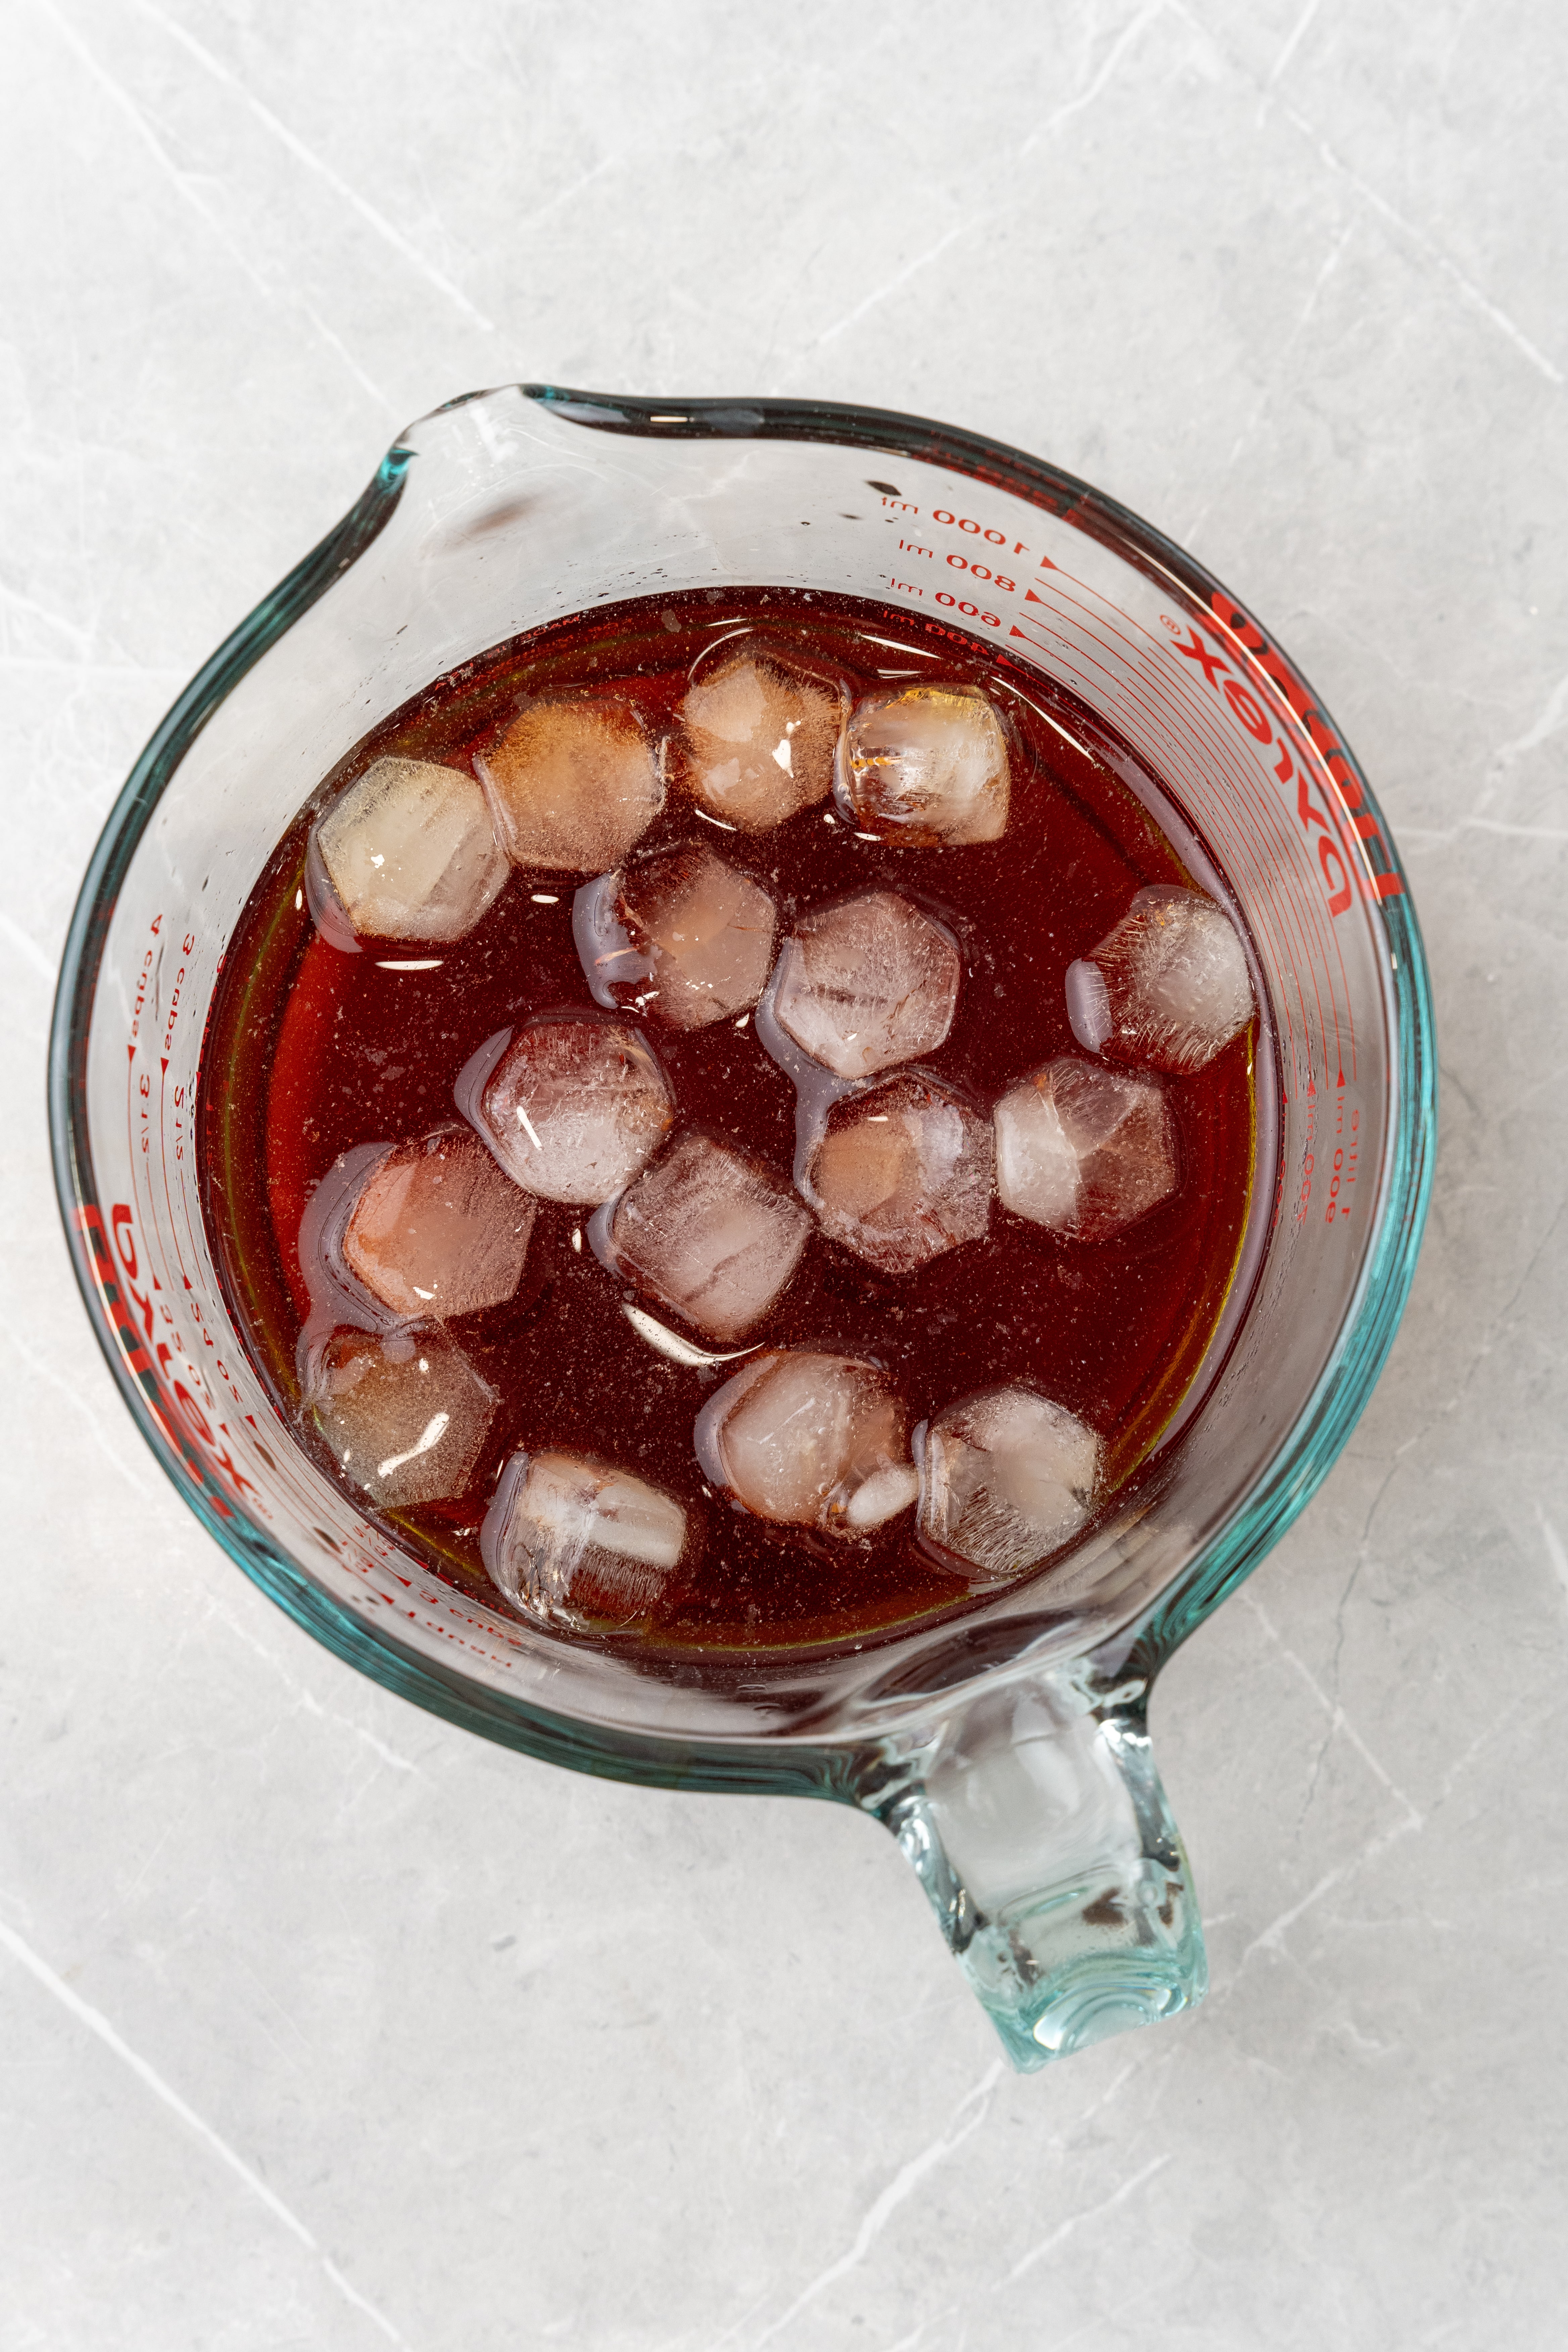 ice cubes in sweet tea in a glass measuring dish